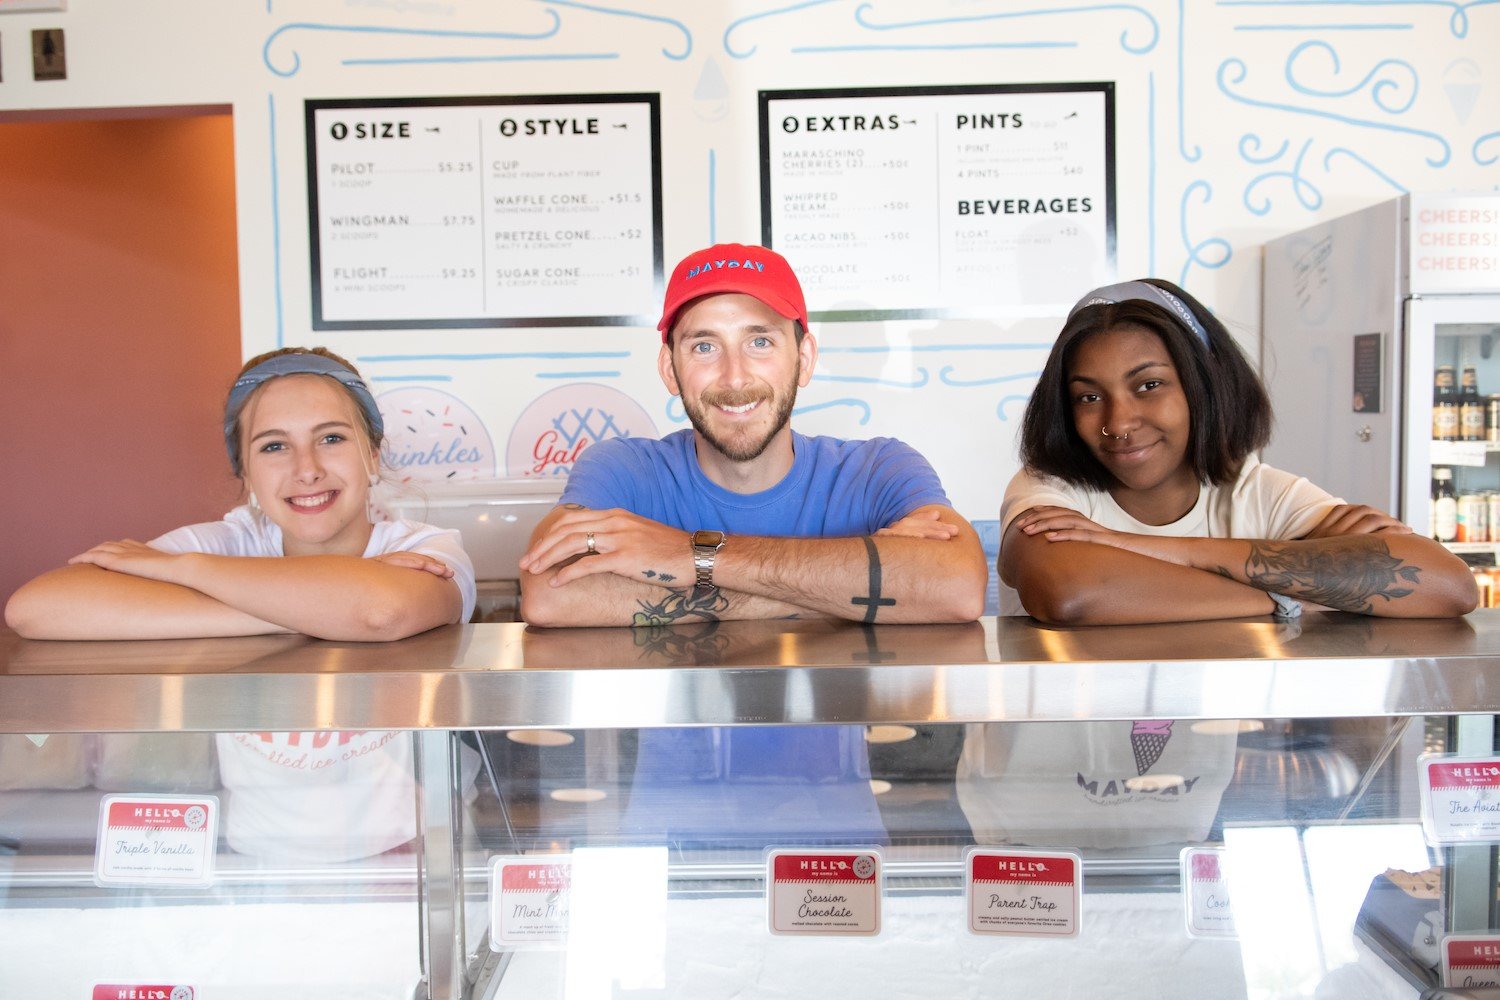 The team at Mayday Handcrafted Ice Creams stands ready to serve some of the shop’s iconic treats.